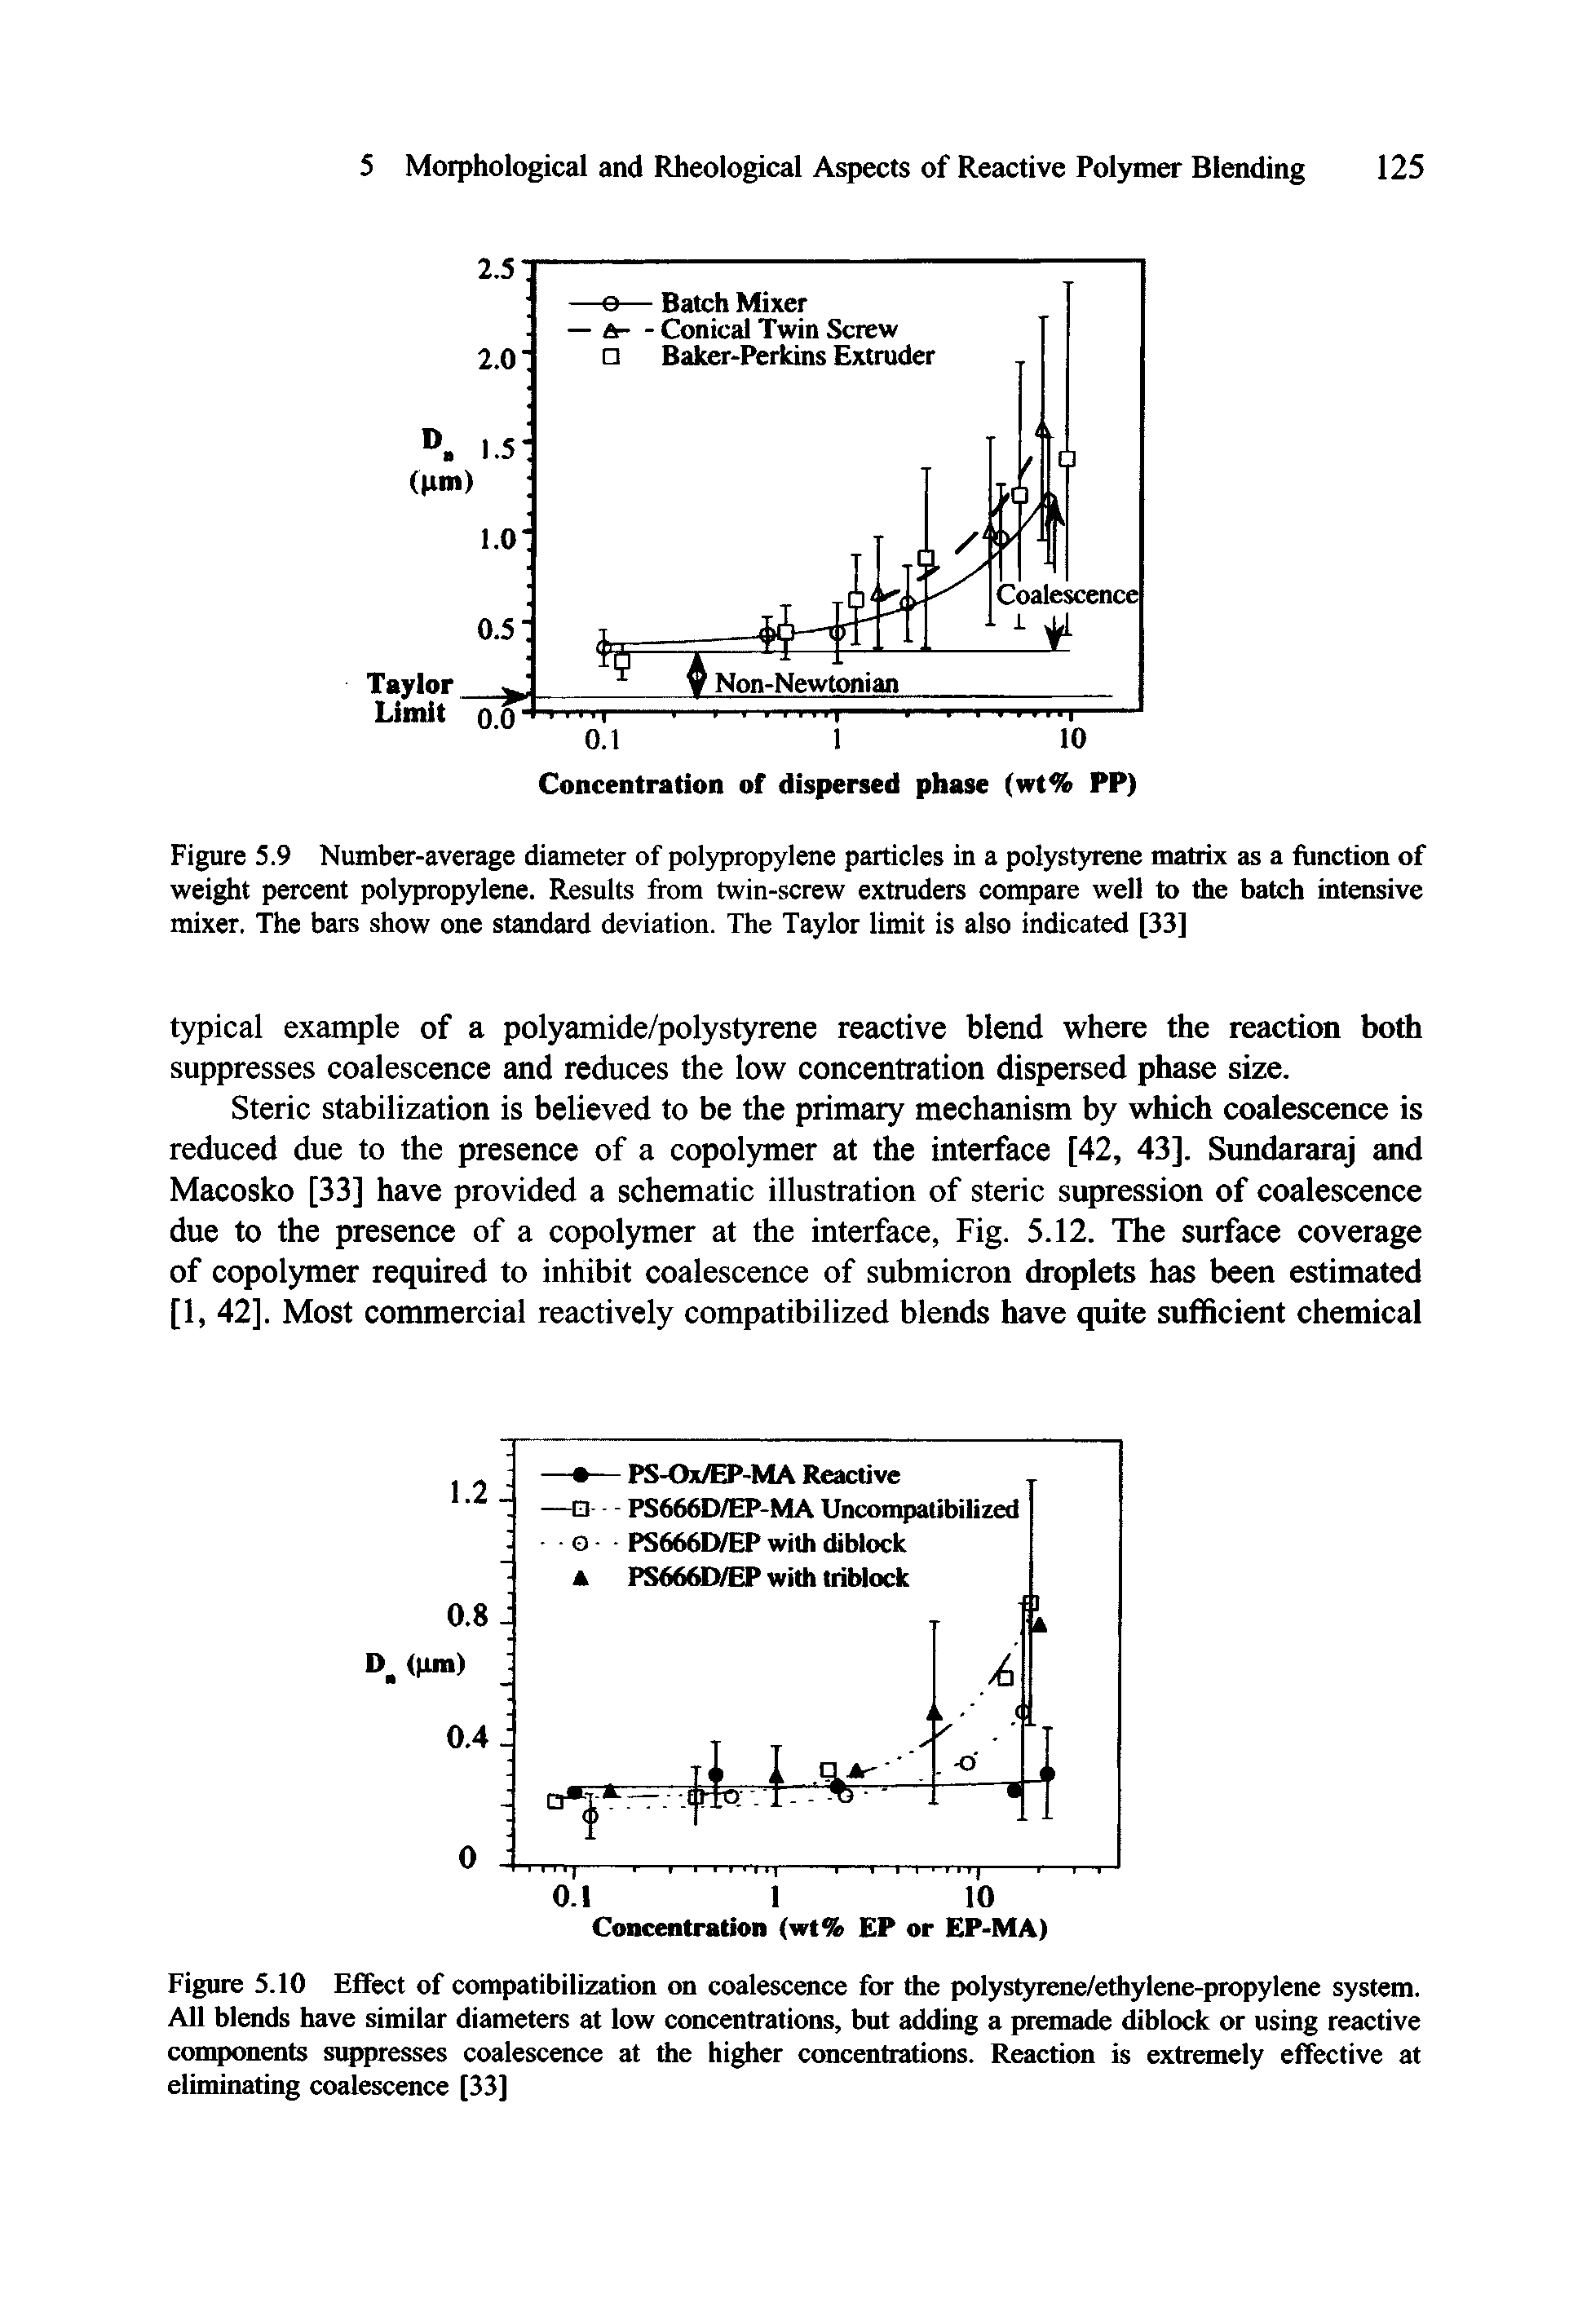 Figure 5.9 Number-average diameter of polypropylene particles in a polystyrene matrix as a function of weight percent polypropylene. Results fiom twin-screw extmders compare well to the batch intensive mixer, The bars show one standard deviation. The Taylor limit is also indicated [33]...